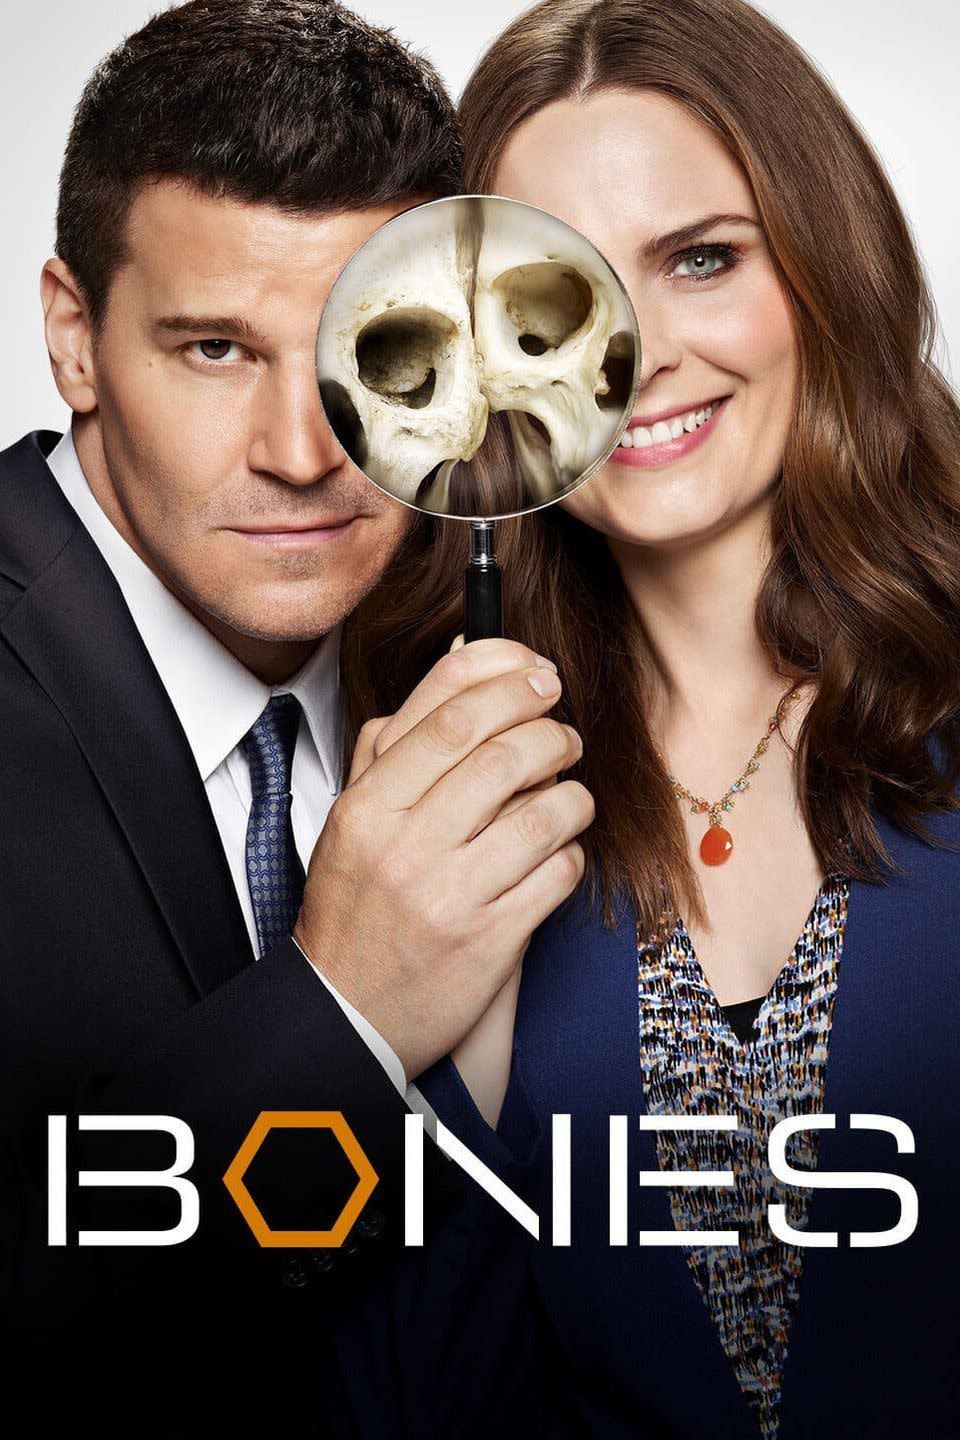 The popular television show Bones is based off a book series by UNC Charlotte professor Kathy Reichs.
The books mostly take place in Charlotte and has plenty of references to restaurants, streets and neighborhoods.